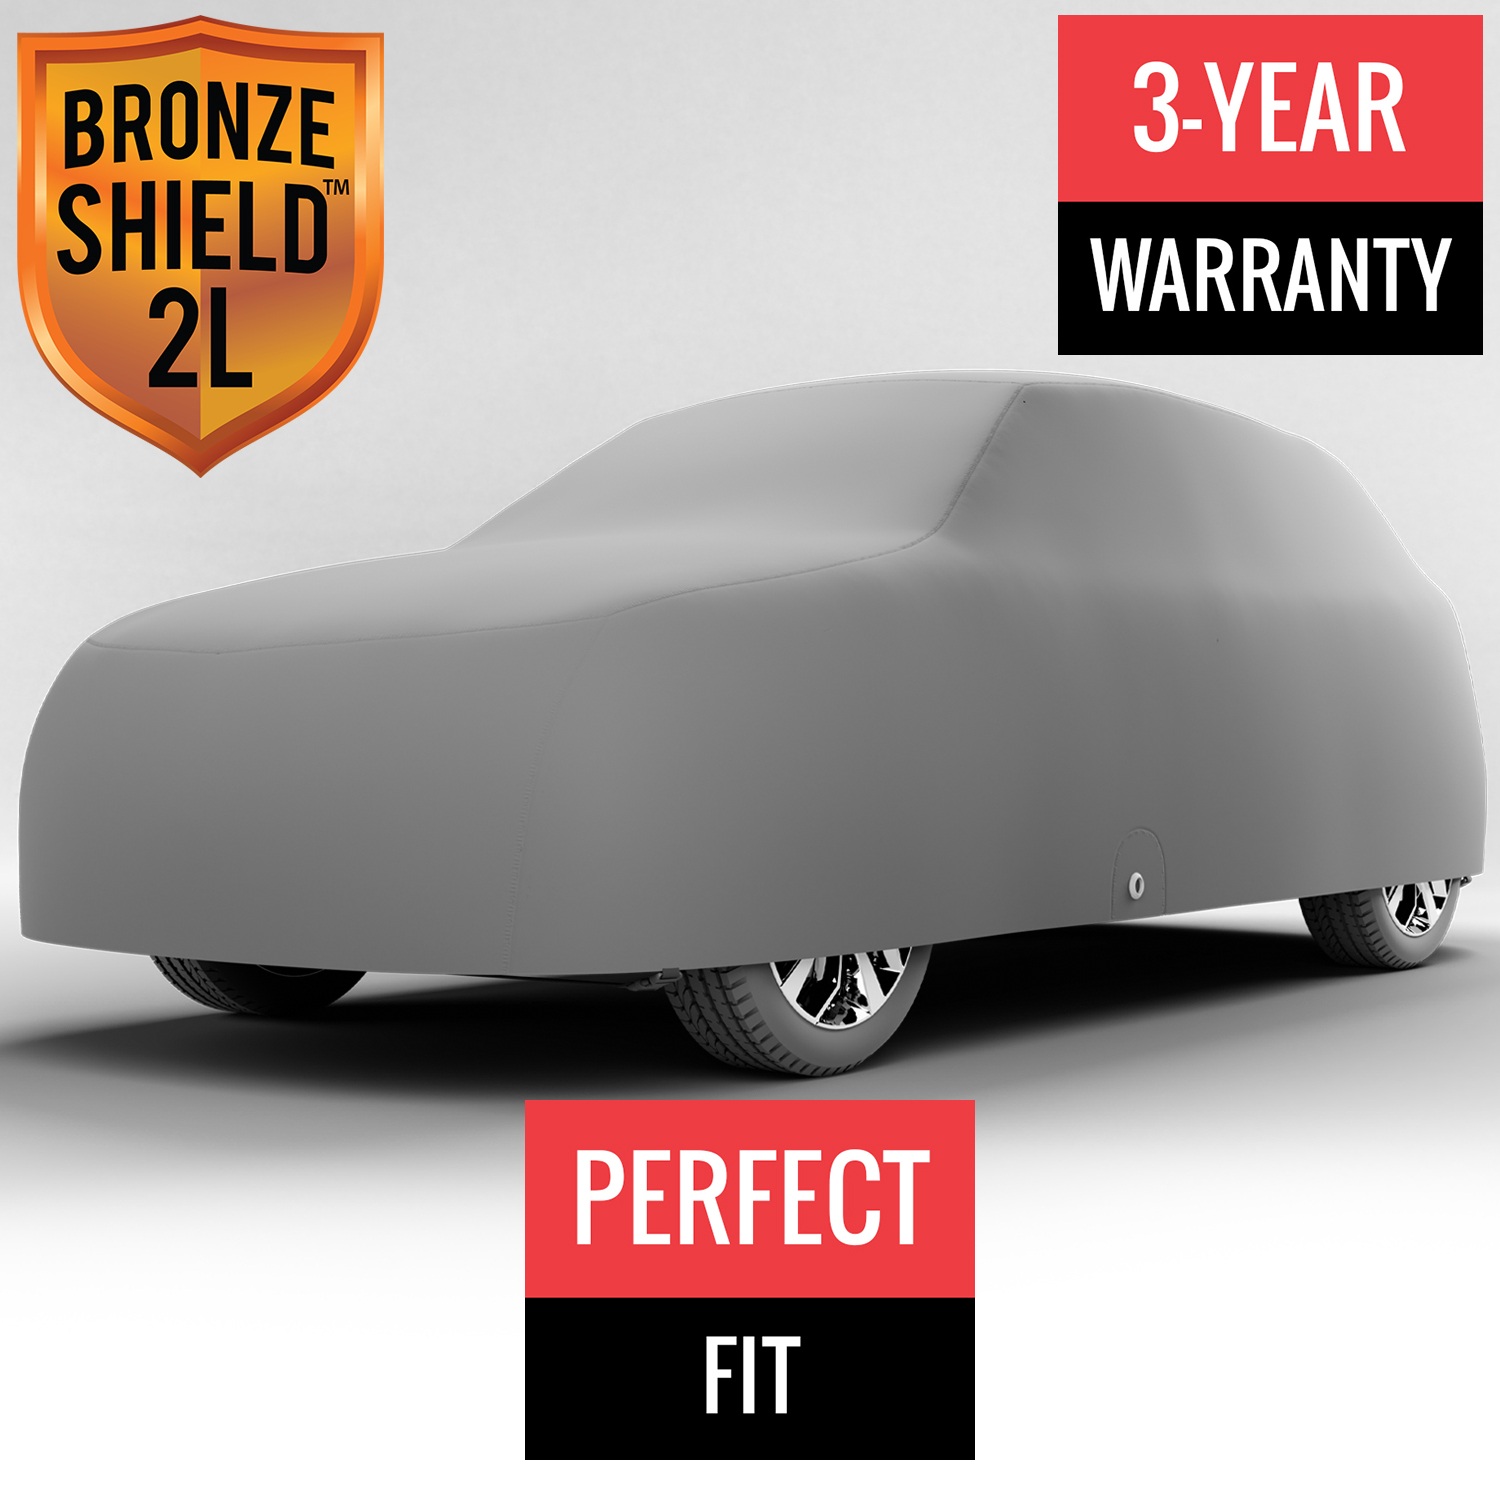 Bronze Shield 2L - Car Cover for Plymouth Voyager 1990 Van